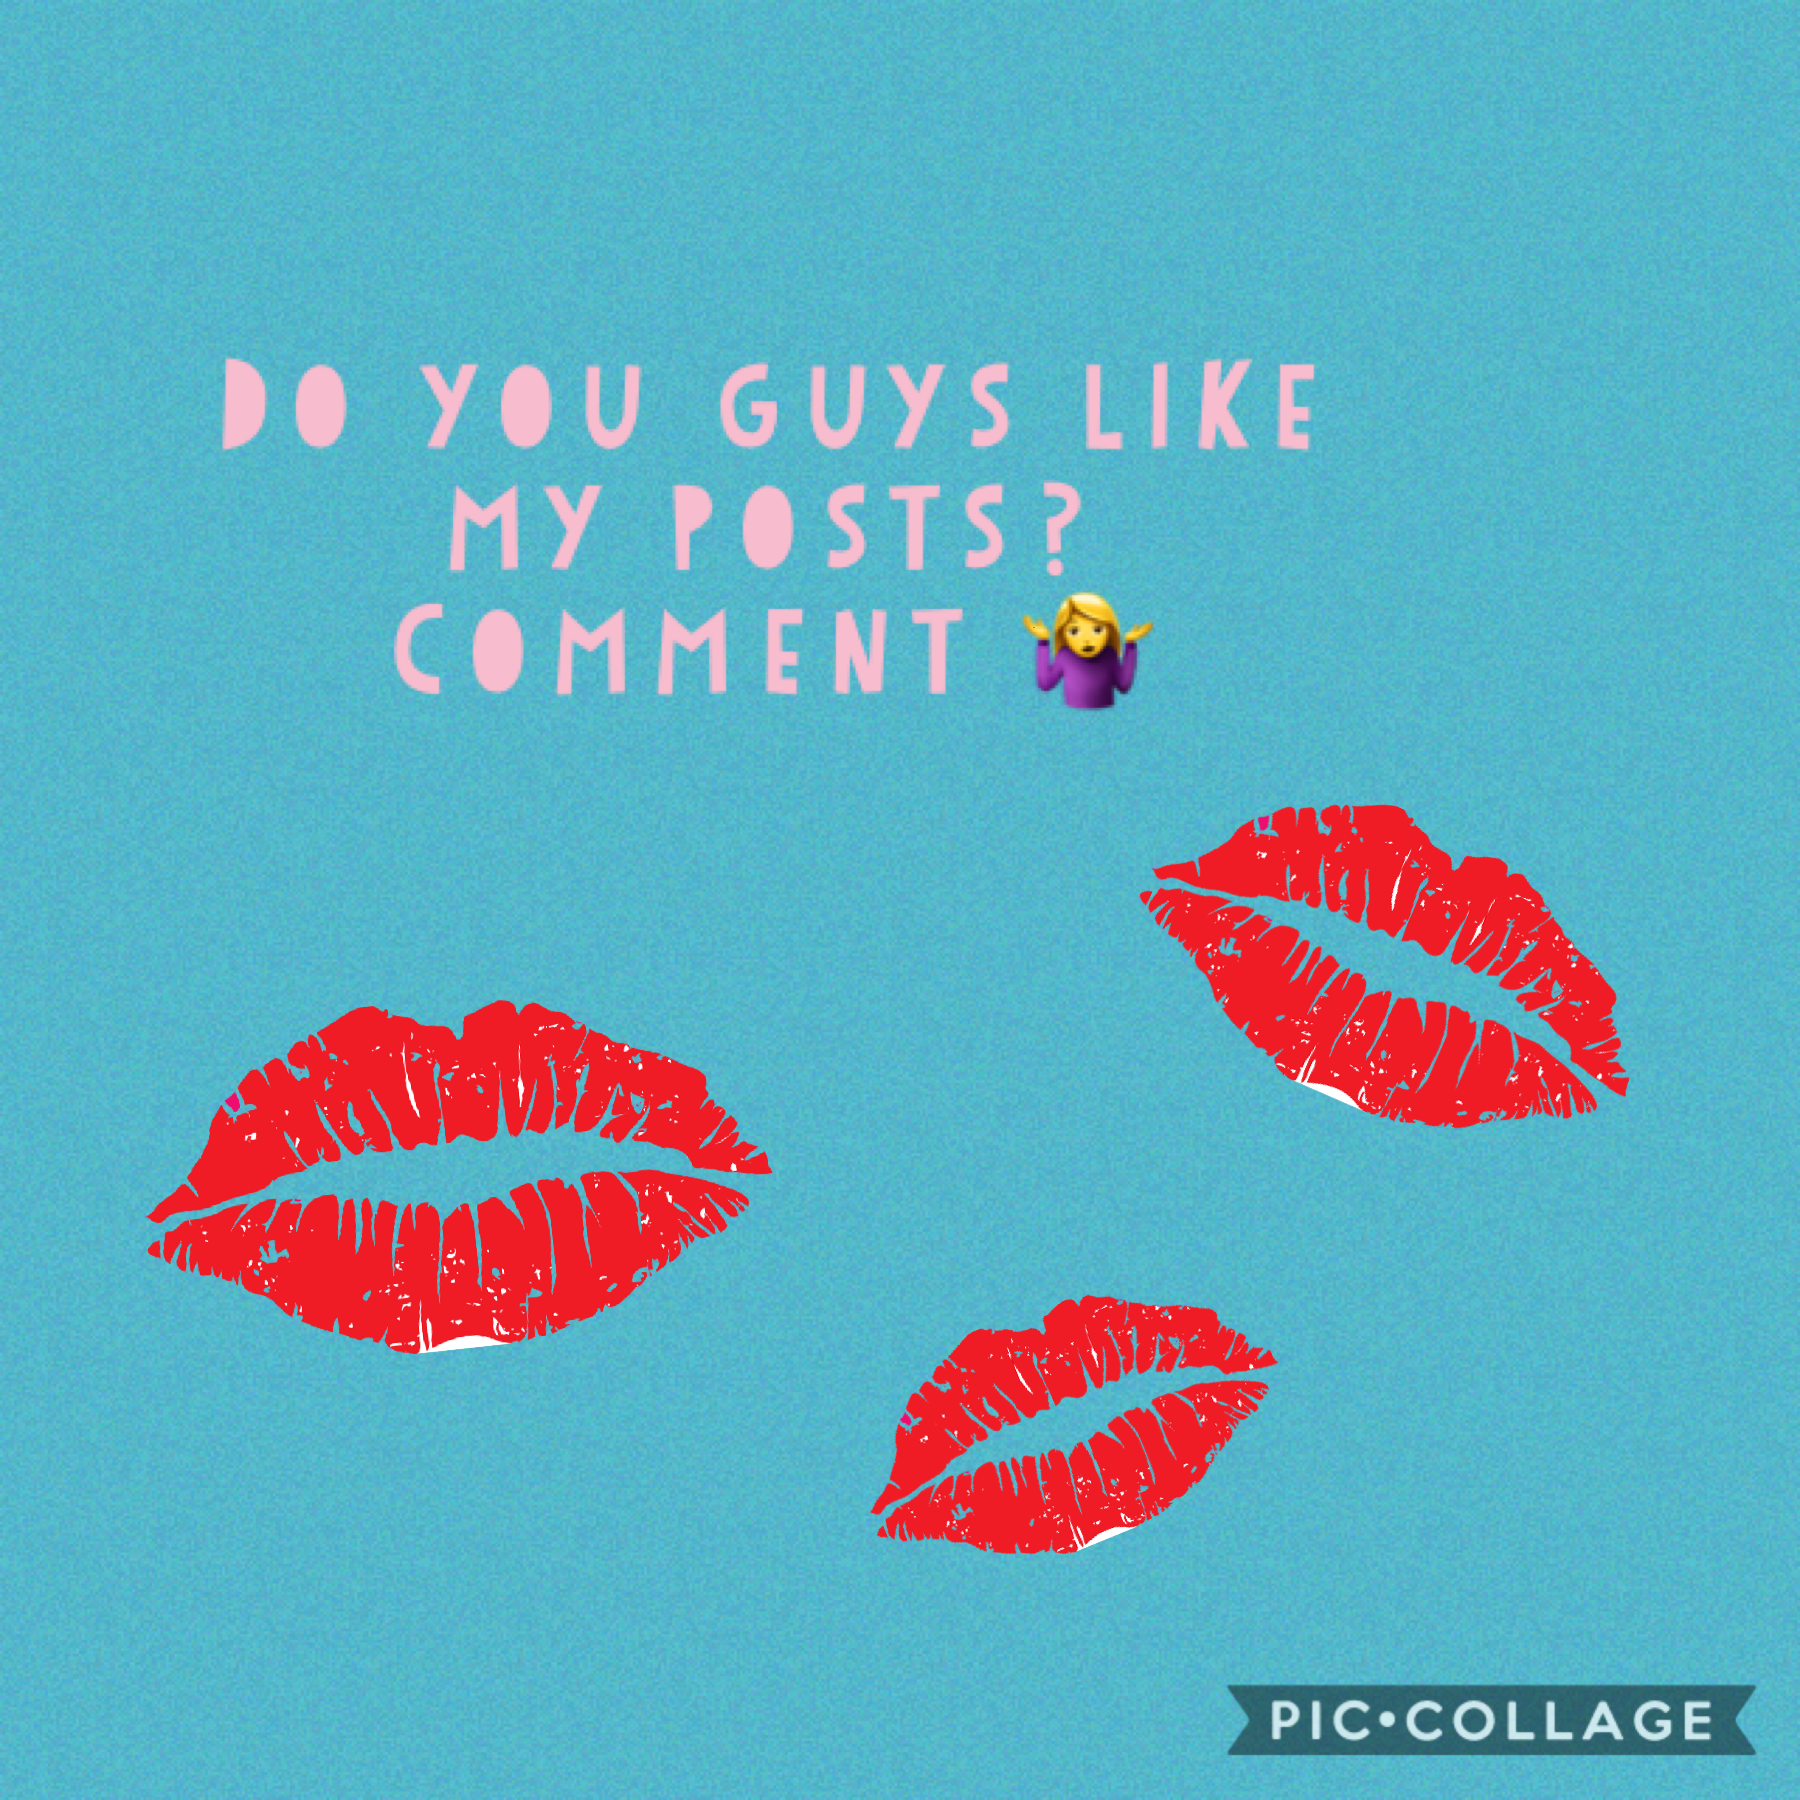 Comment if you like my posts!😉